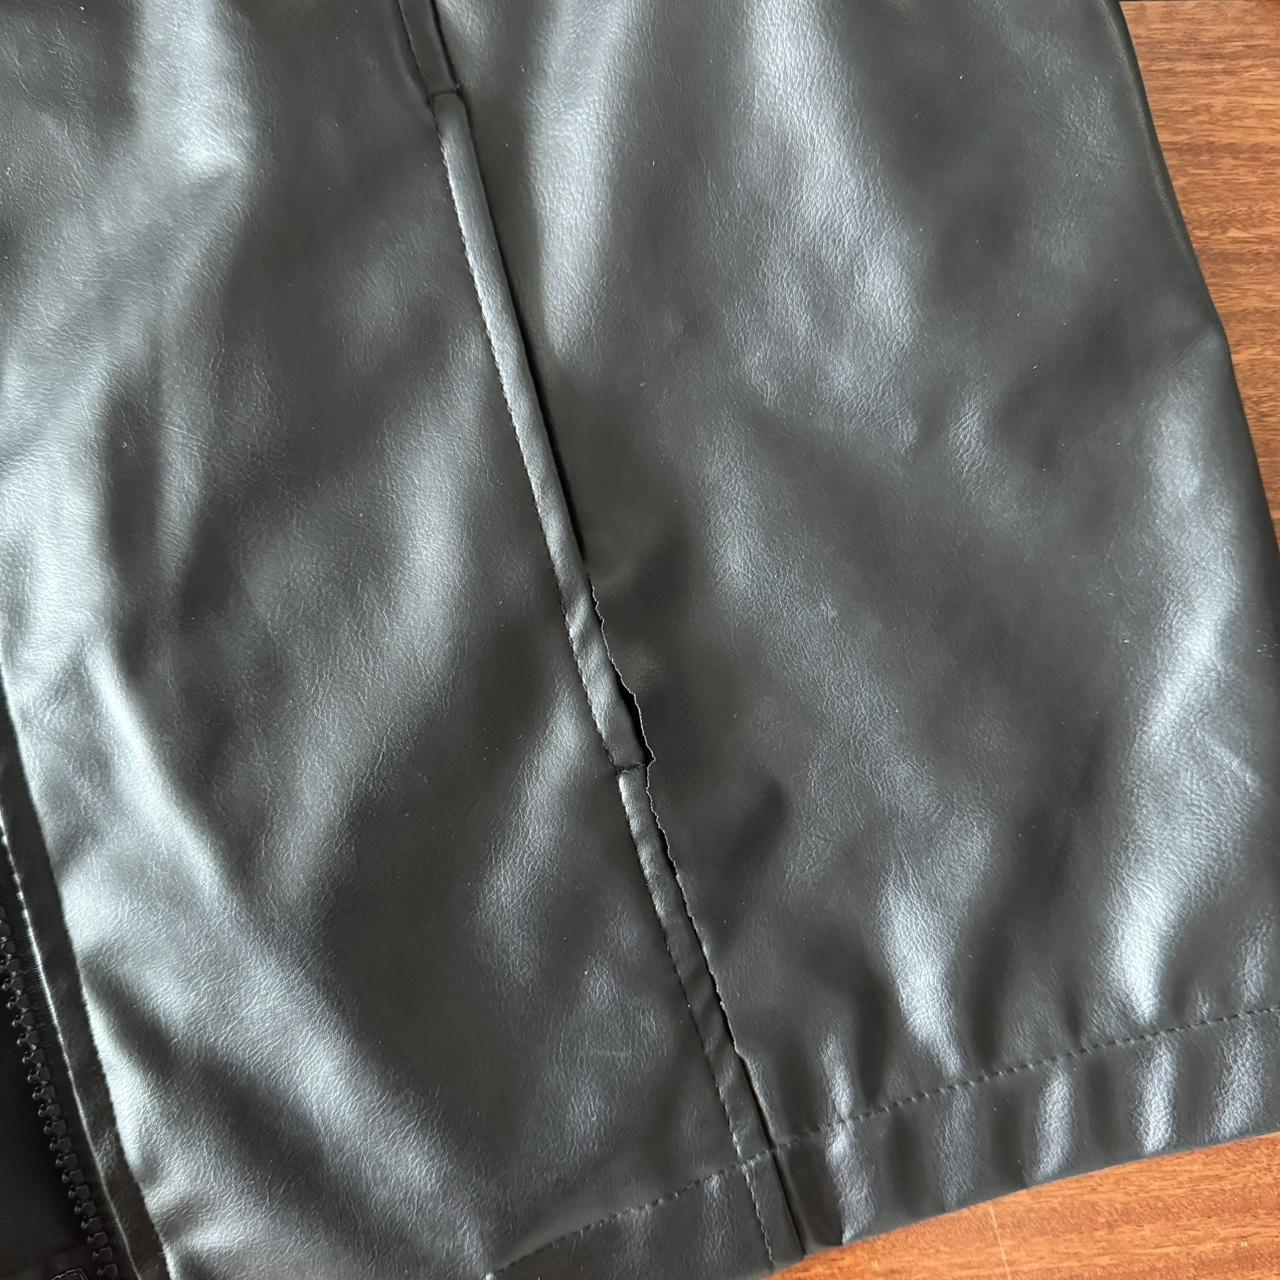 Fake leather jacket Really cute, thin but warm Flaws... - Depop